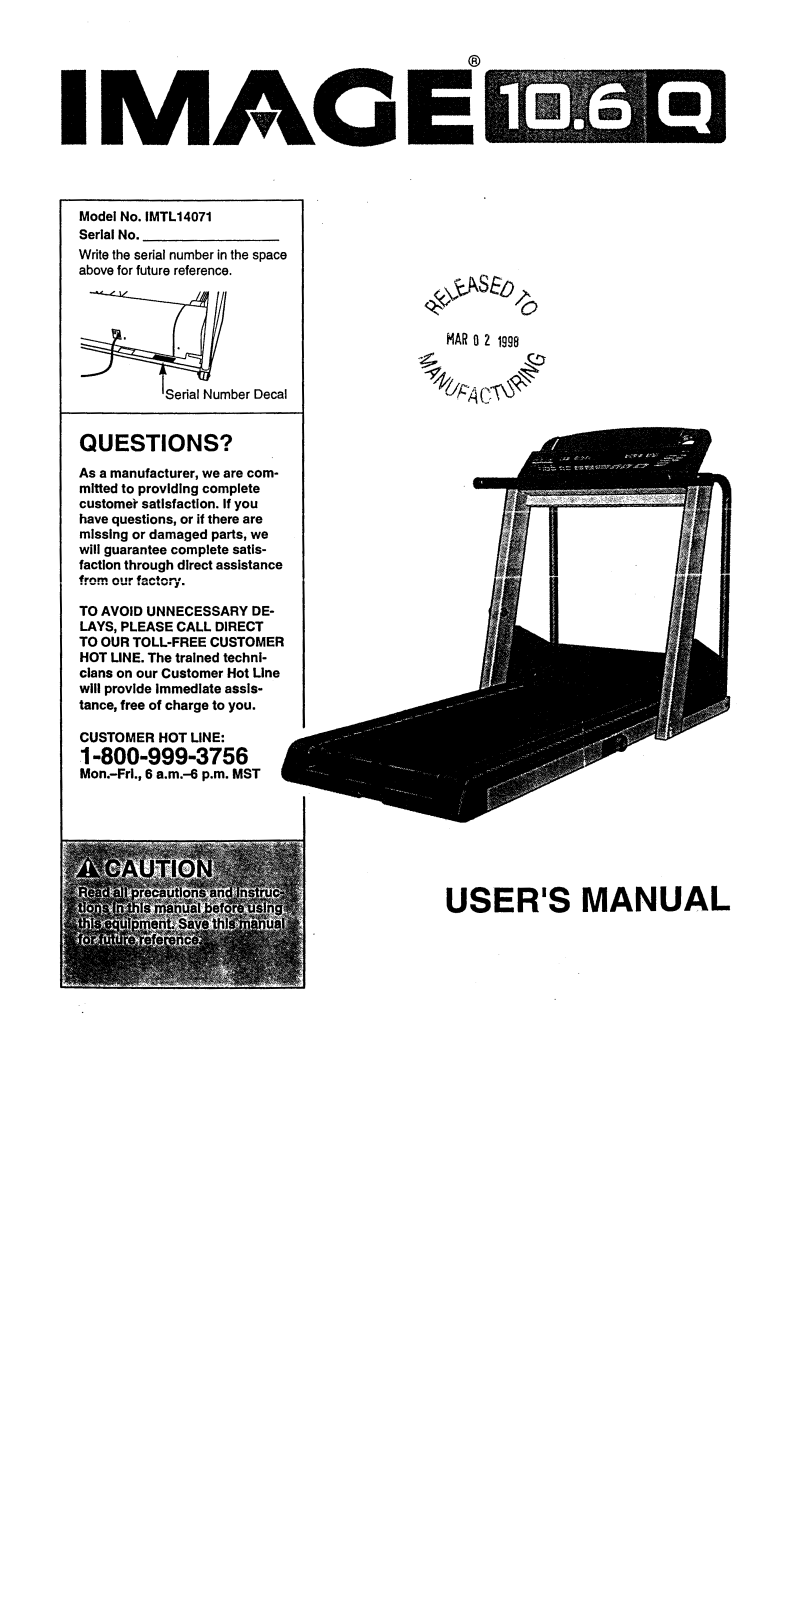 Image IMTL14071 Owner's Manual